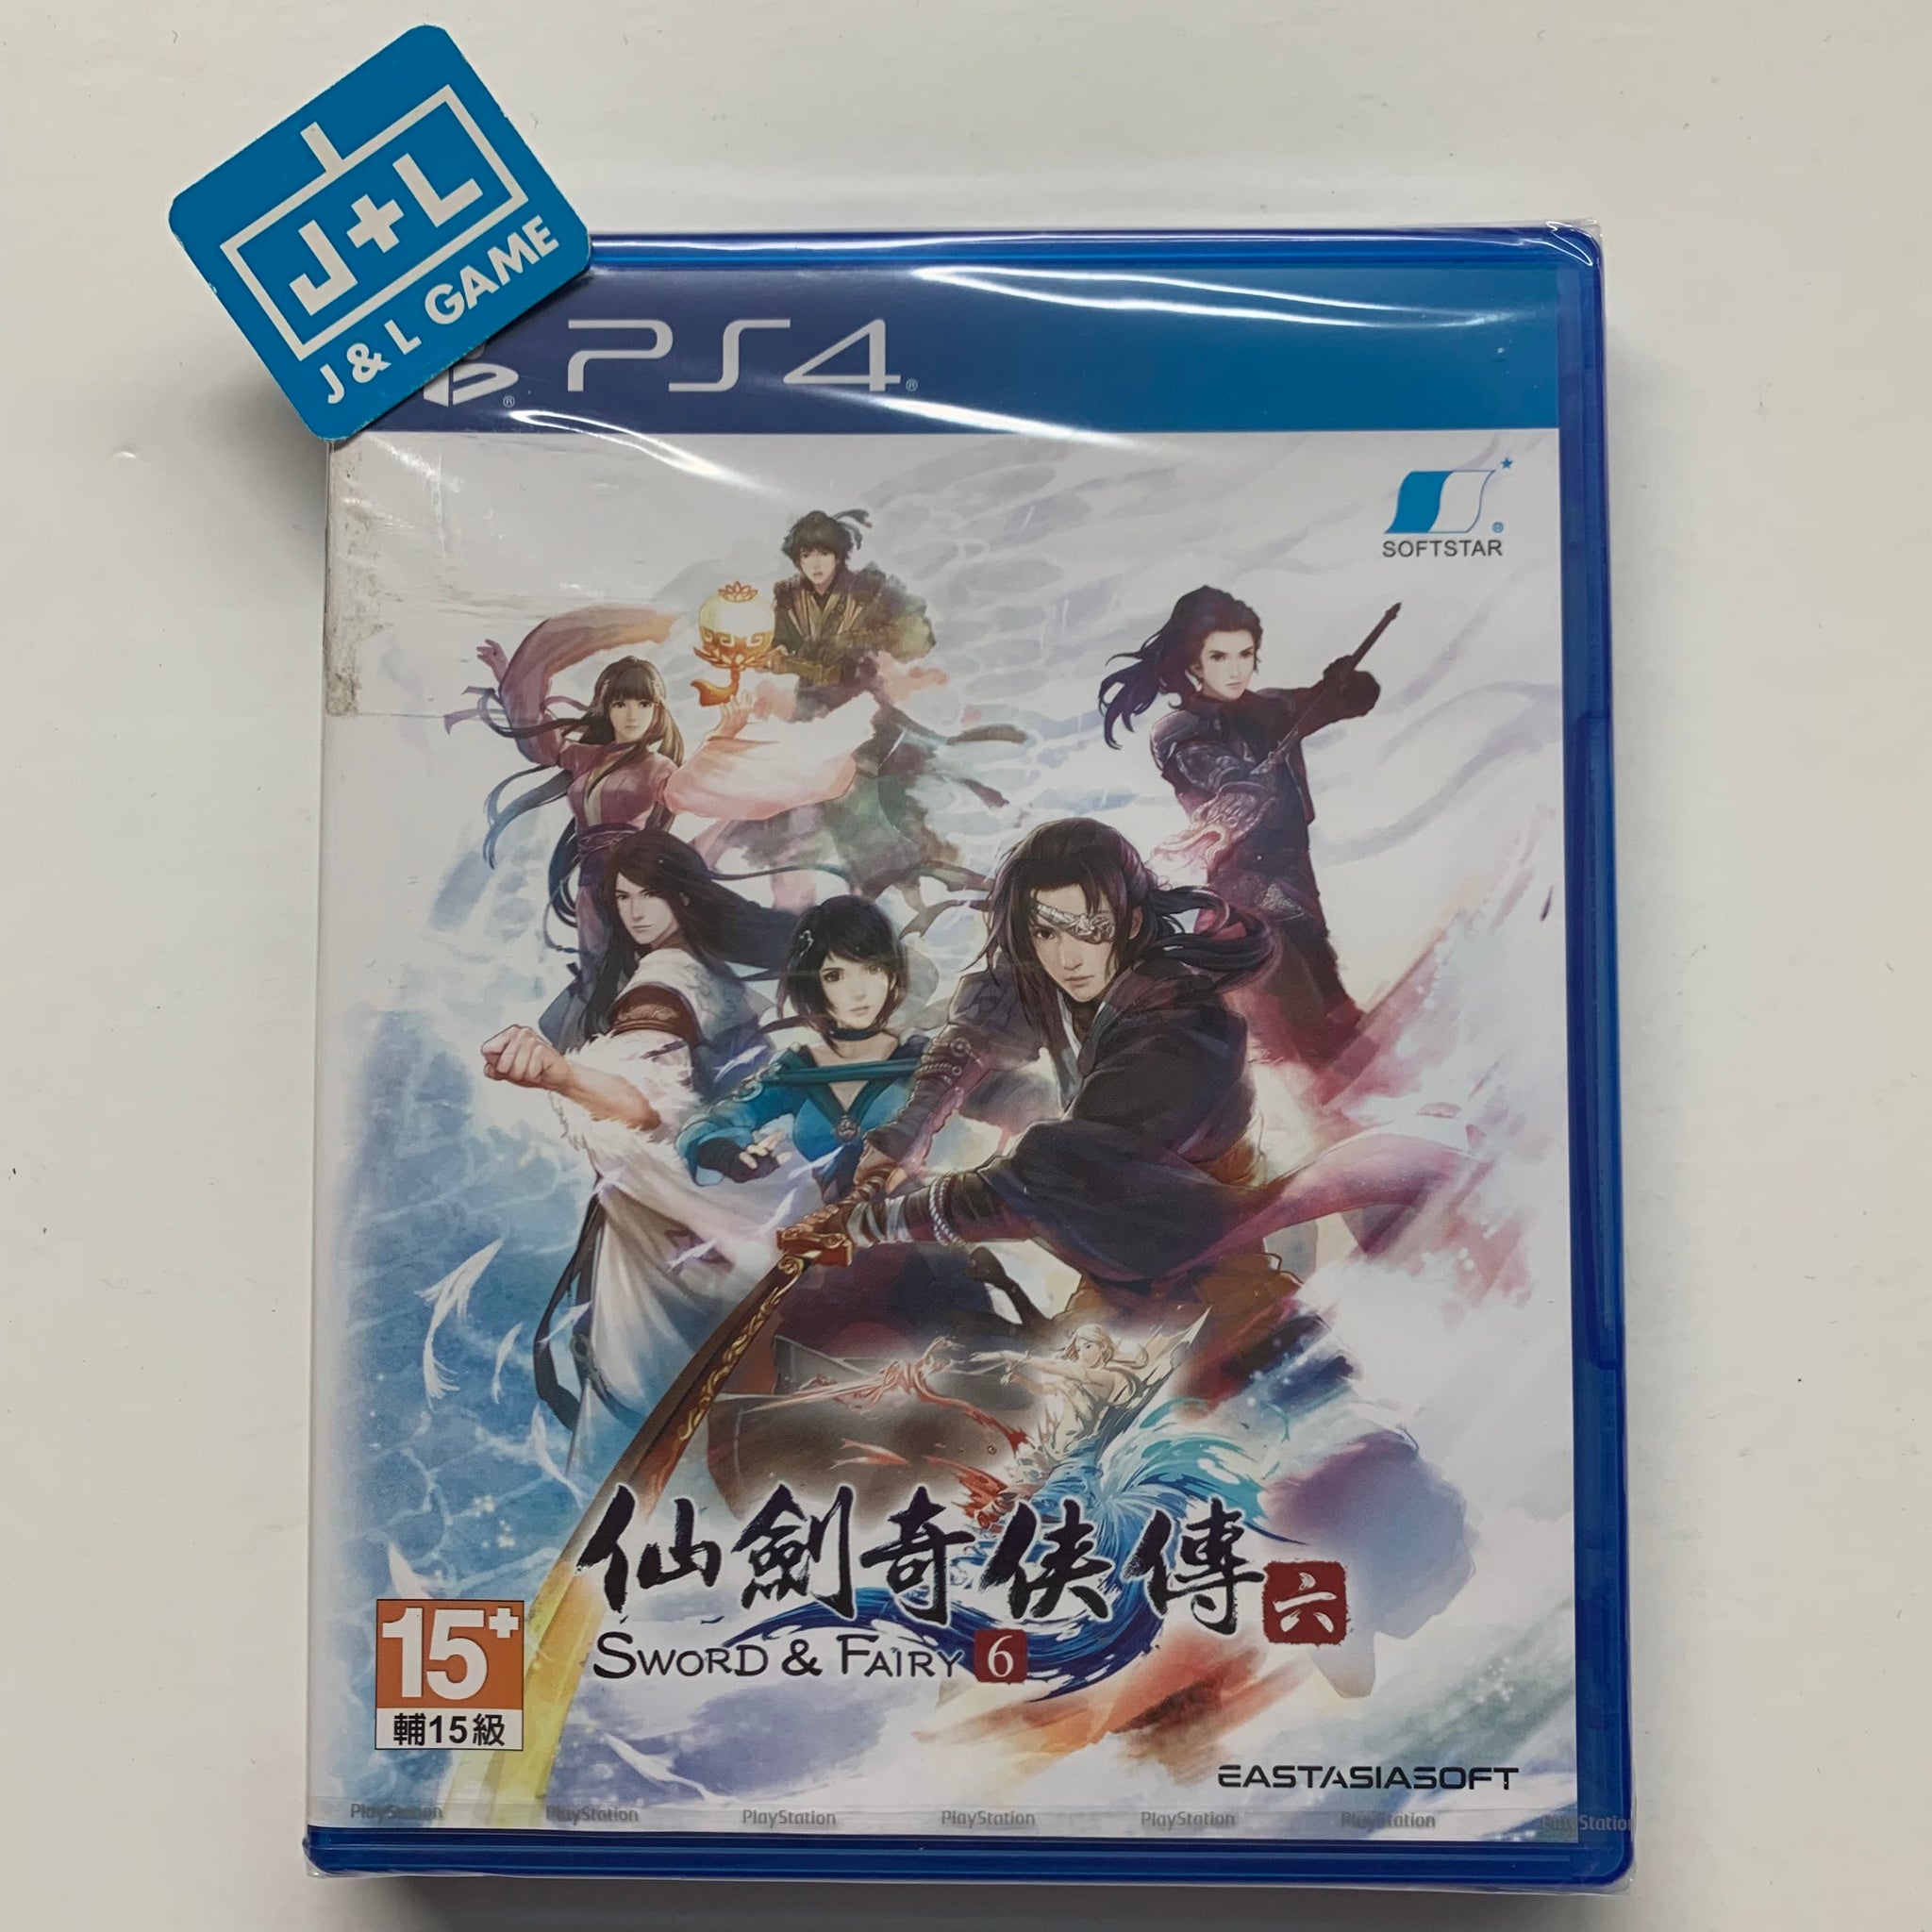 Sword & Fairy 6 - (PS4) PlayStation 4 ( Asia Import ) Video Games East Asia Soft   